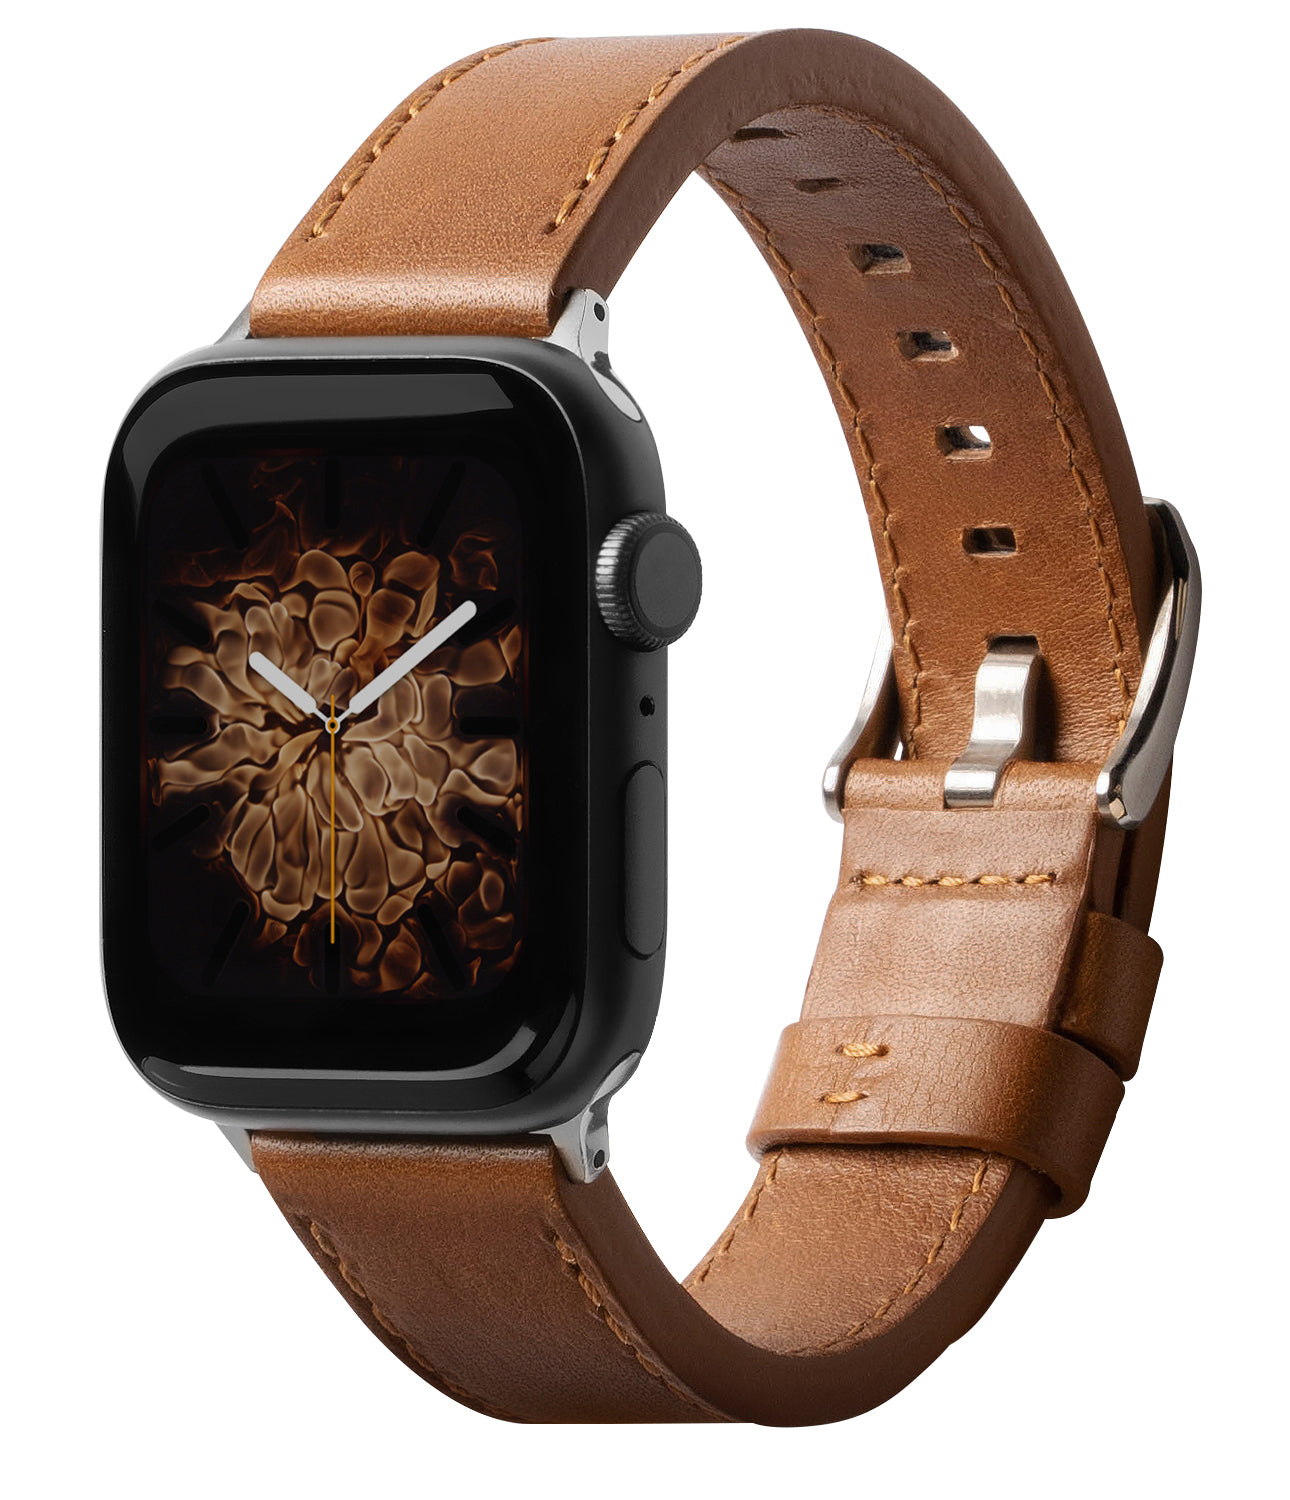 Ringke Leather One Classic Watch Band for Apple Watch 1/2/3 (42mm) - brown